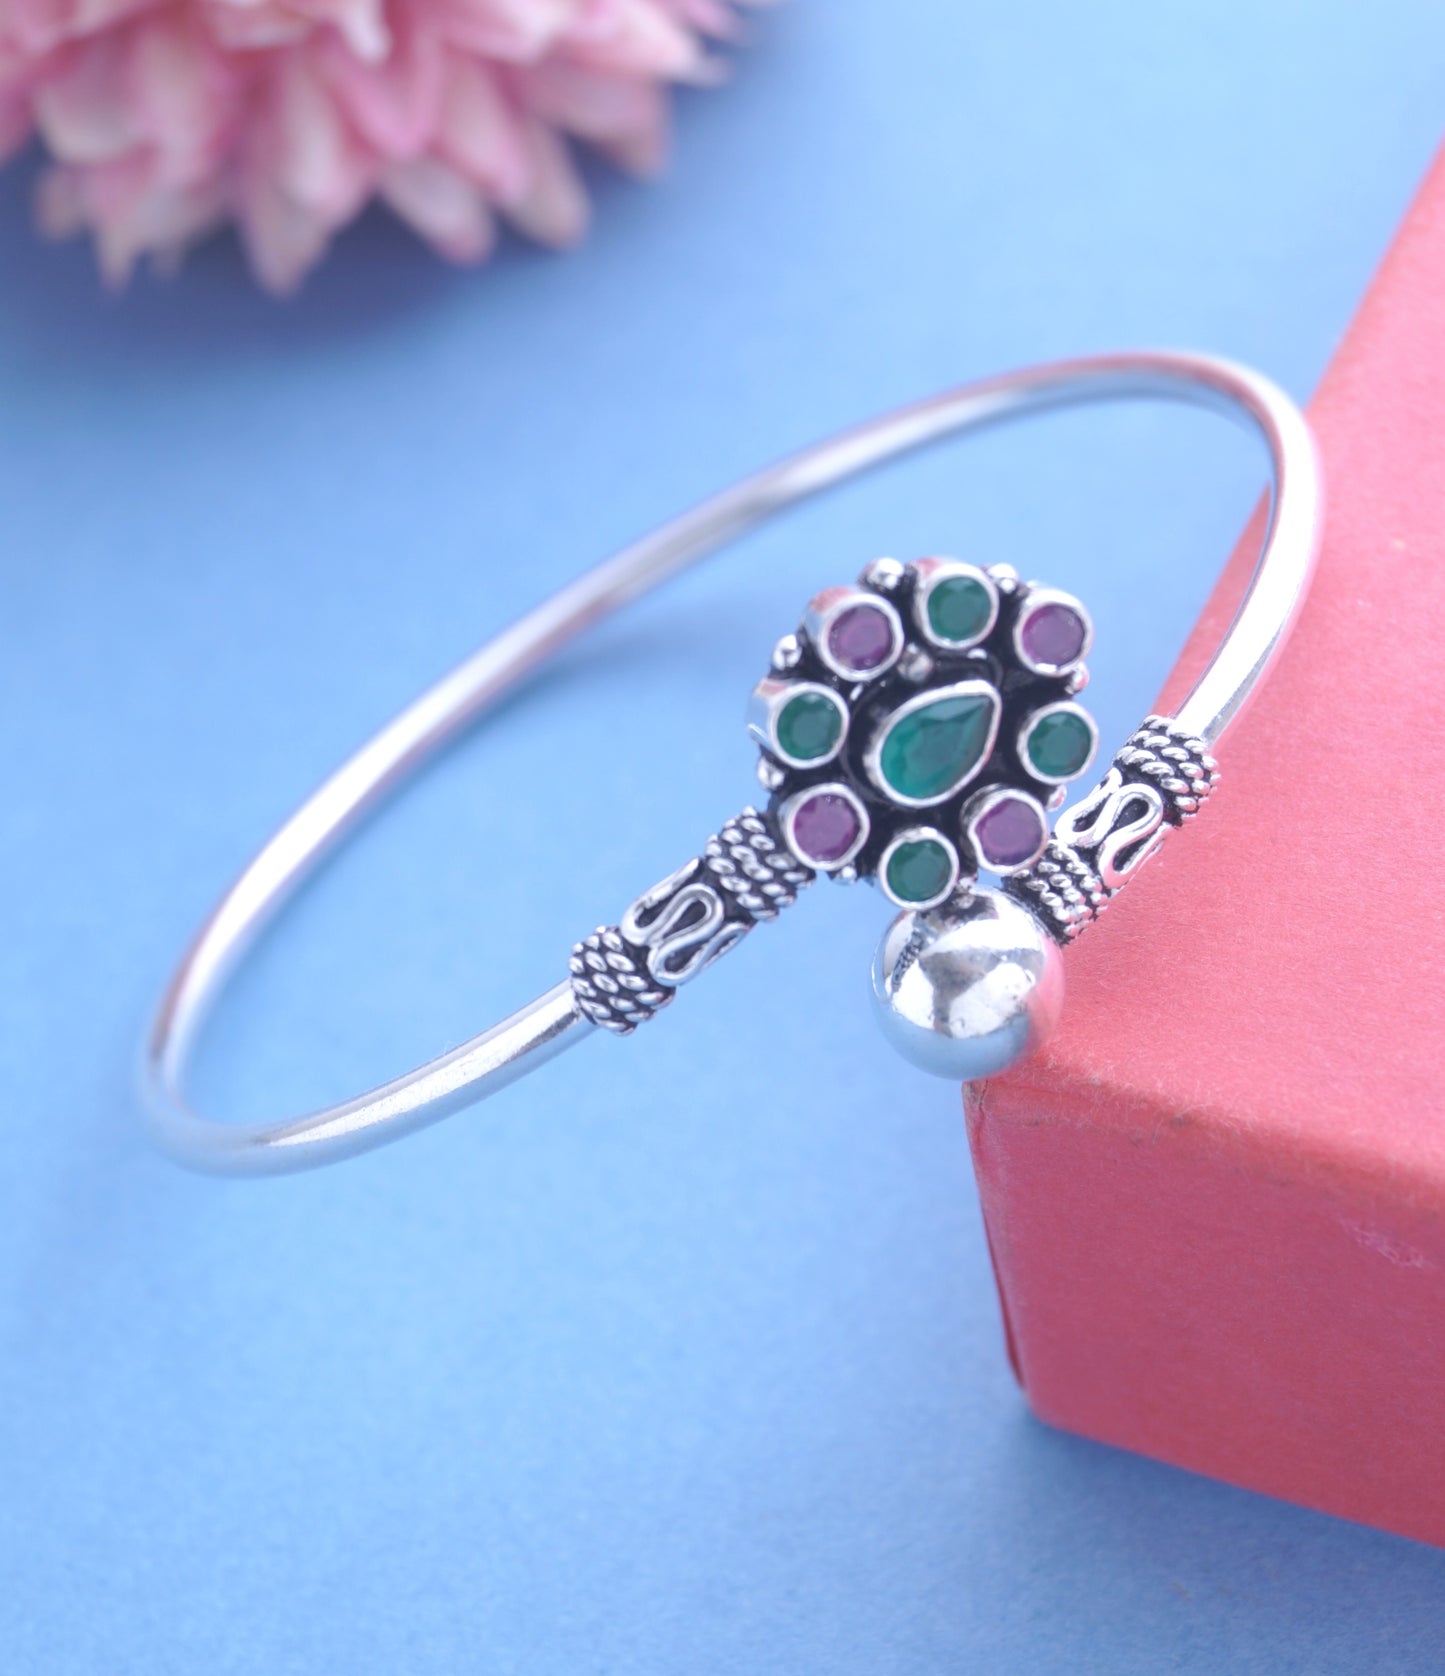 Oxidized Silver Adjustable Kada with Red & Green Stones - Bohemian Elegance with Vibrant Accents"